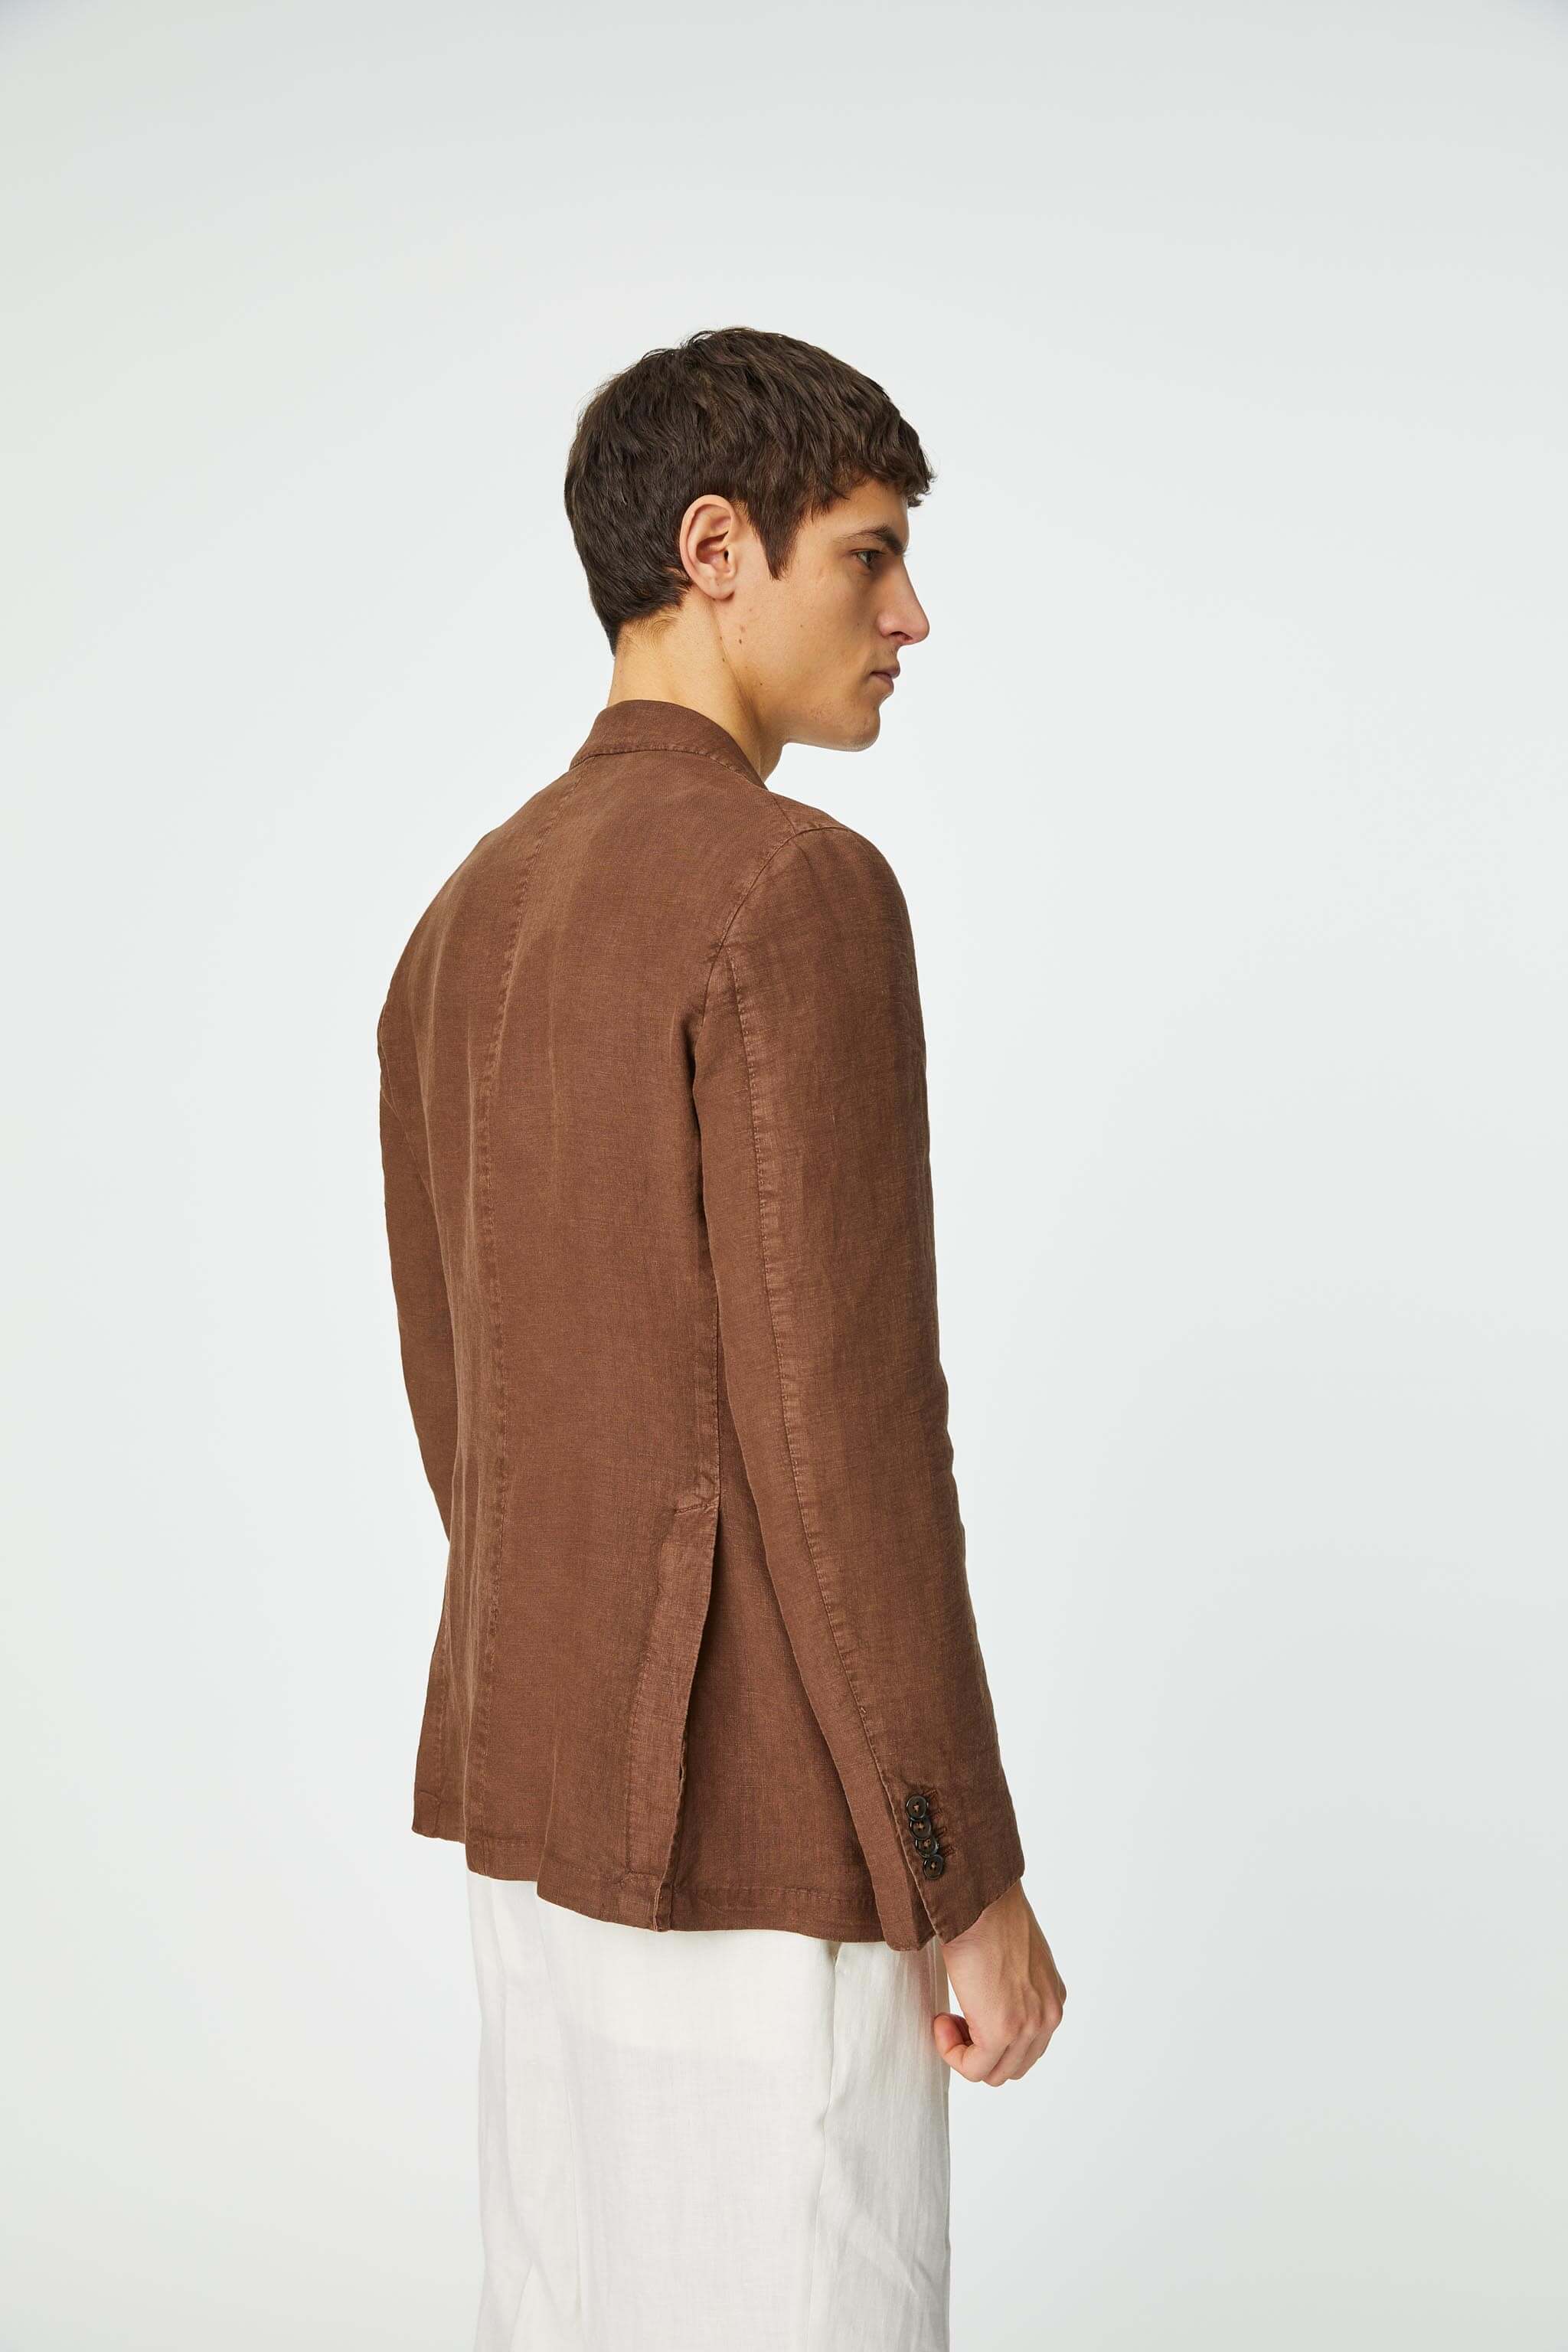 Garment-dyed JACK jacket in rich brown